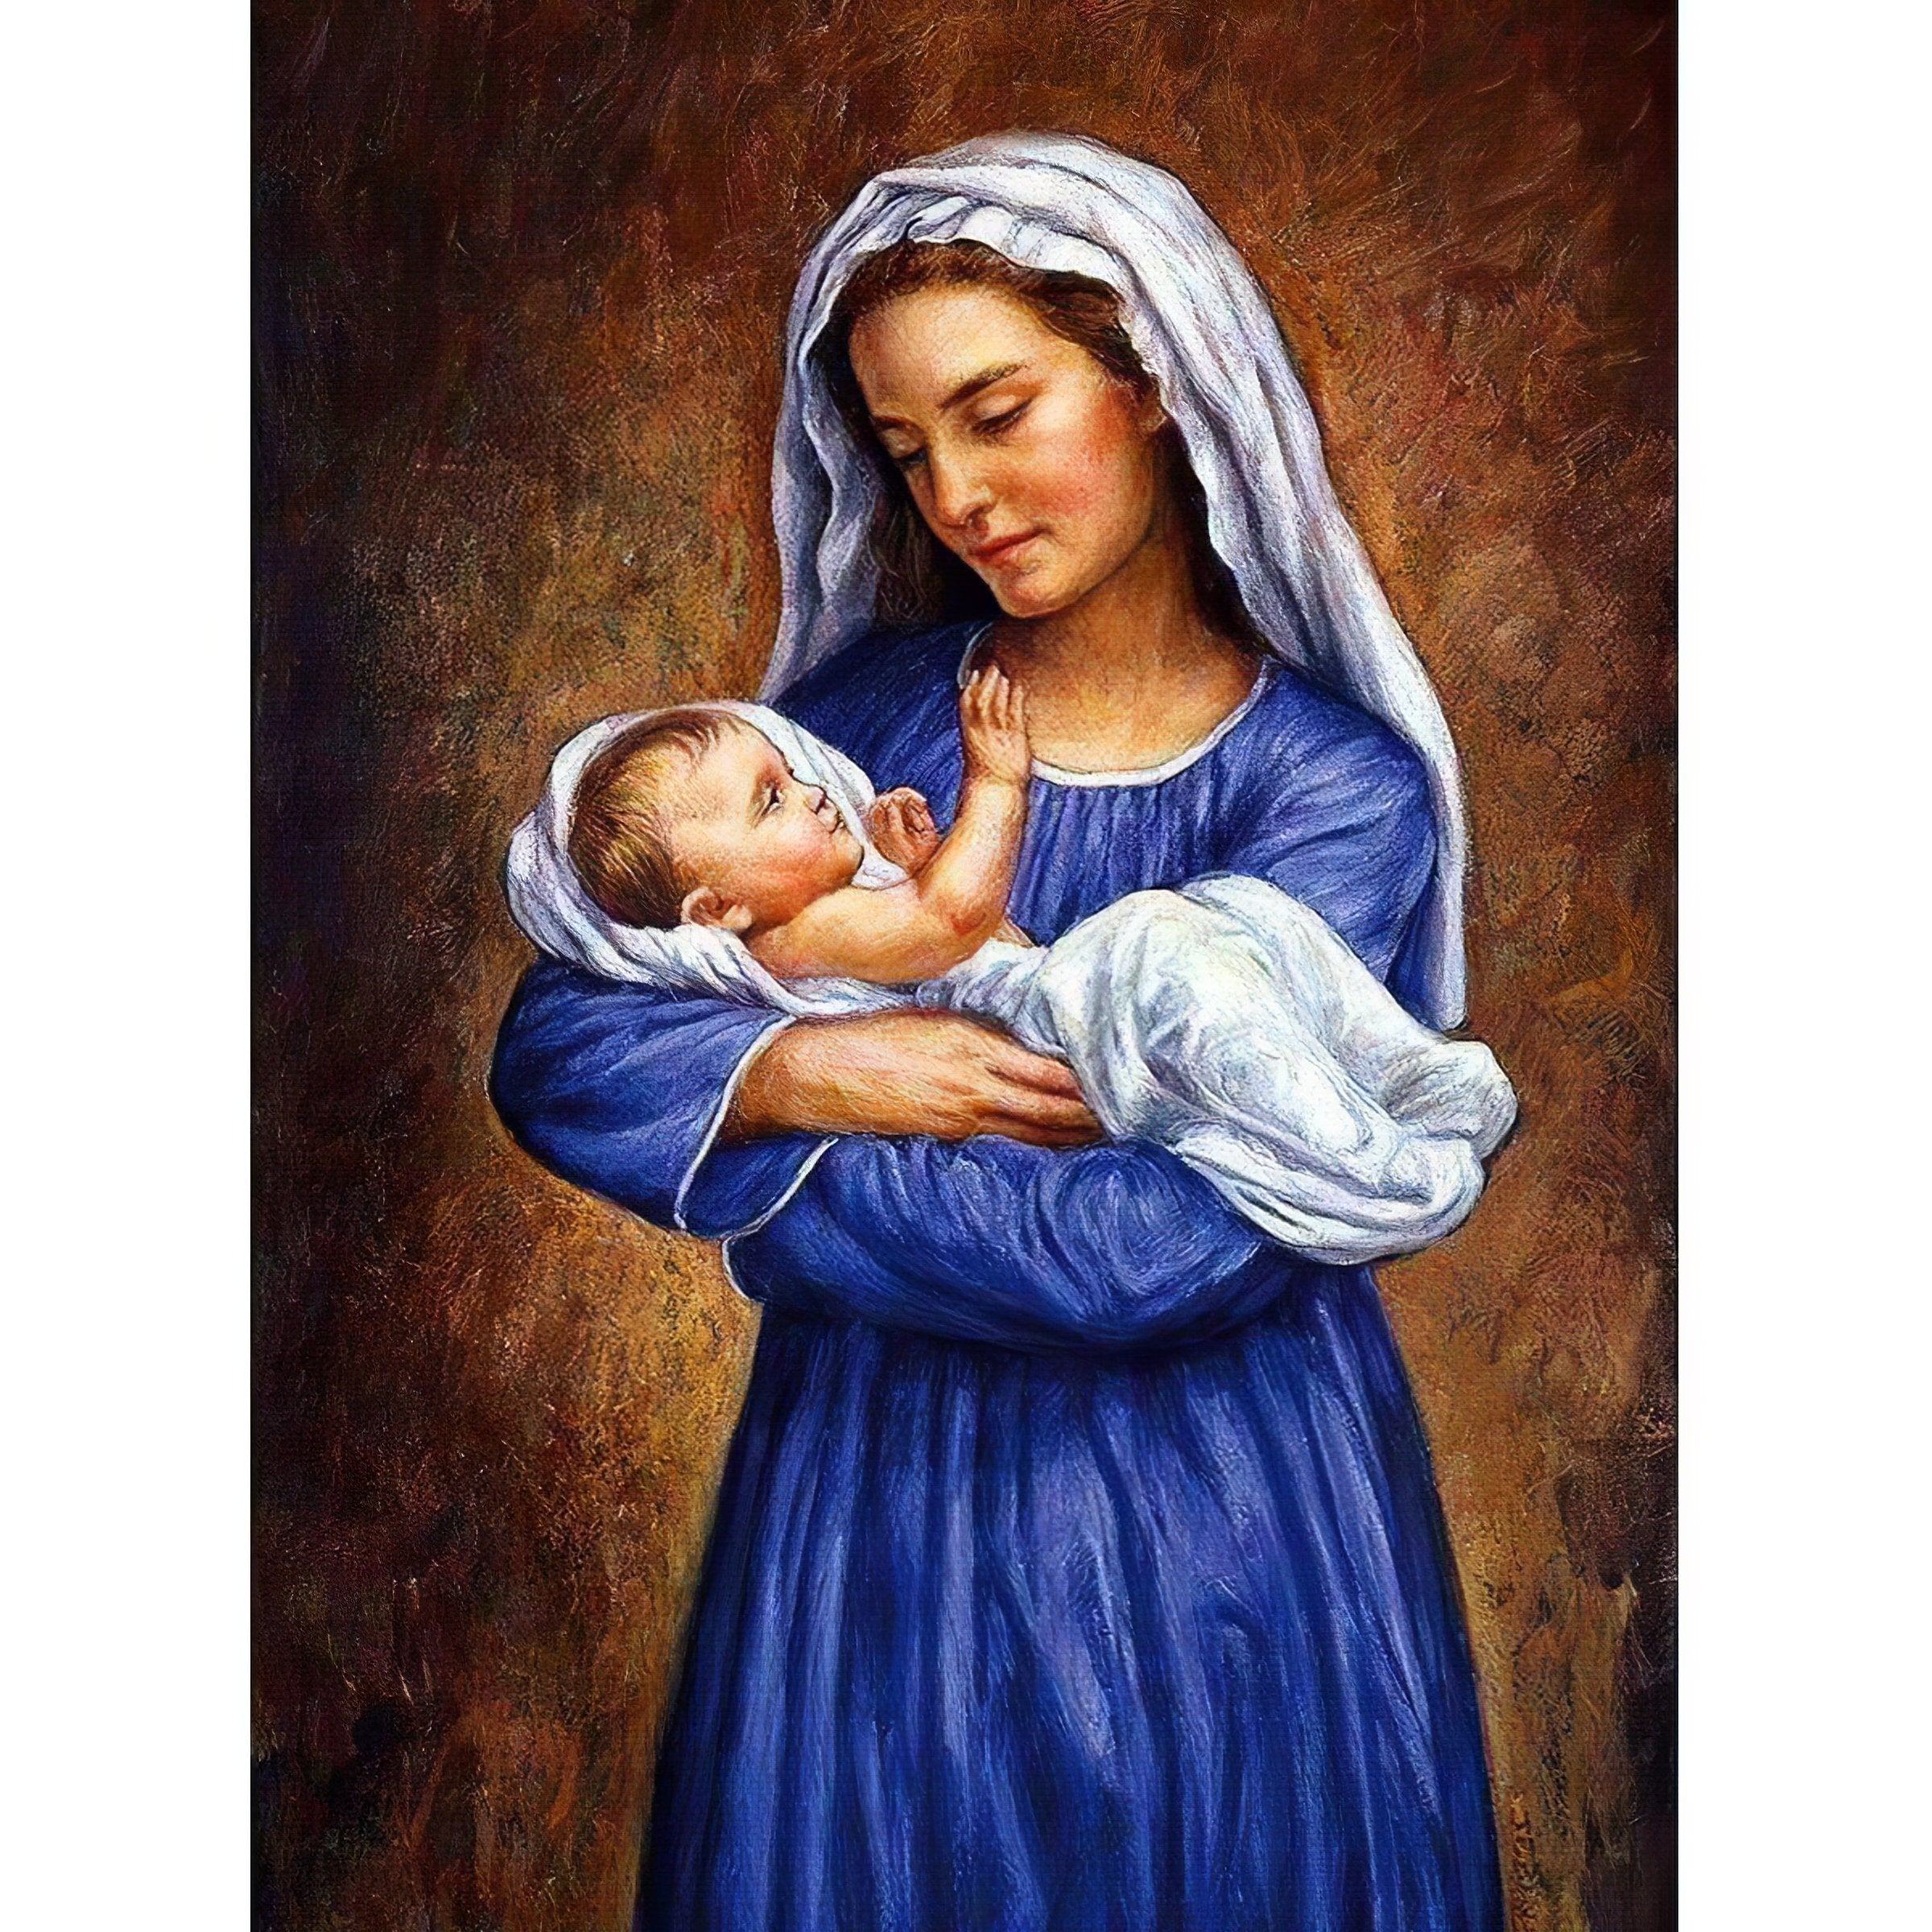 Capture the intimate moments of maternity in this touching artwork.Mother And Her Child - Diamondartlove